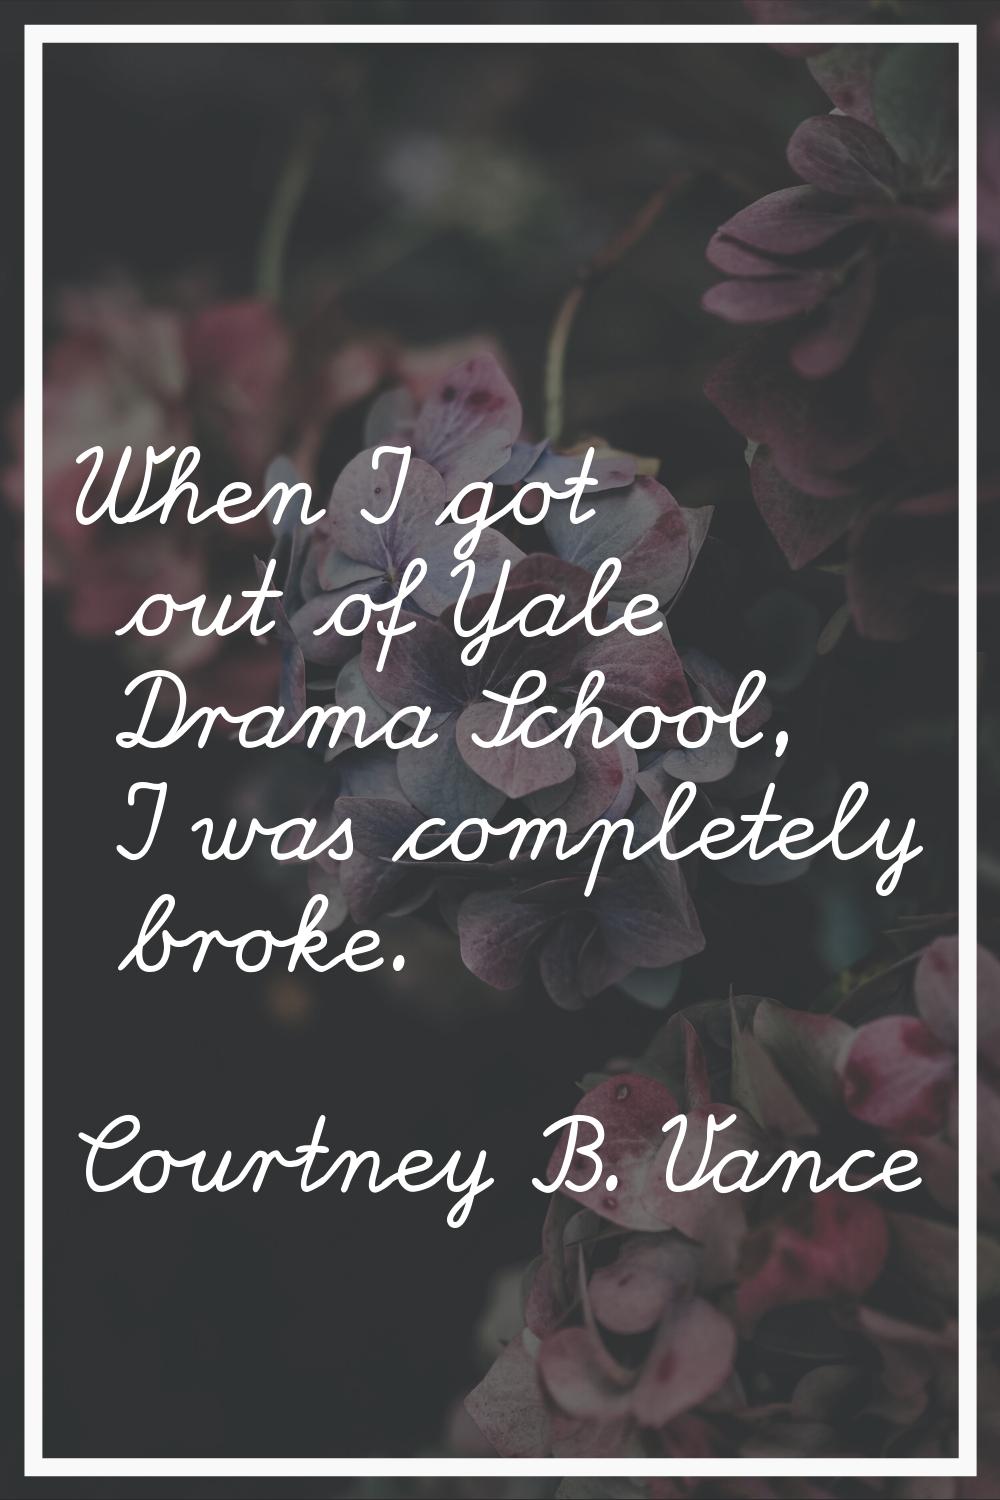 When I got out of Yale Drama School, I was completely broke.